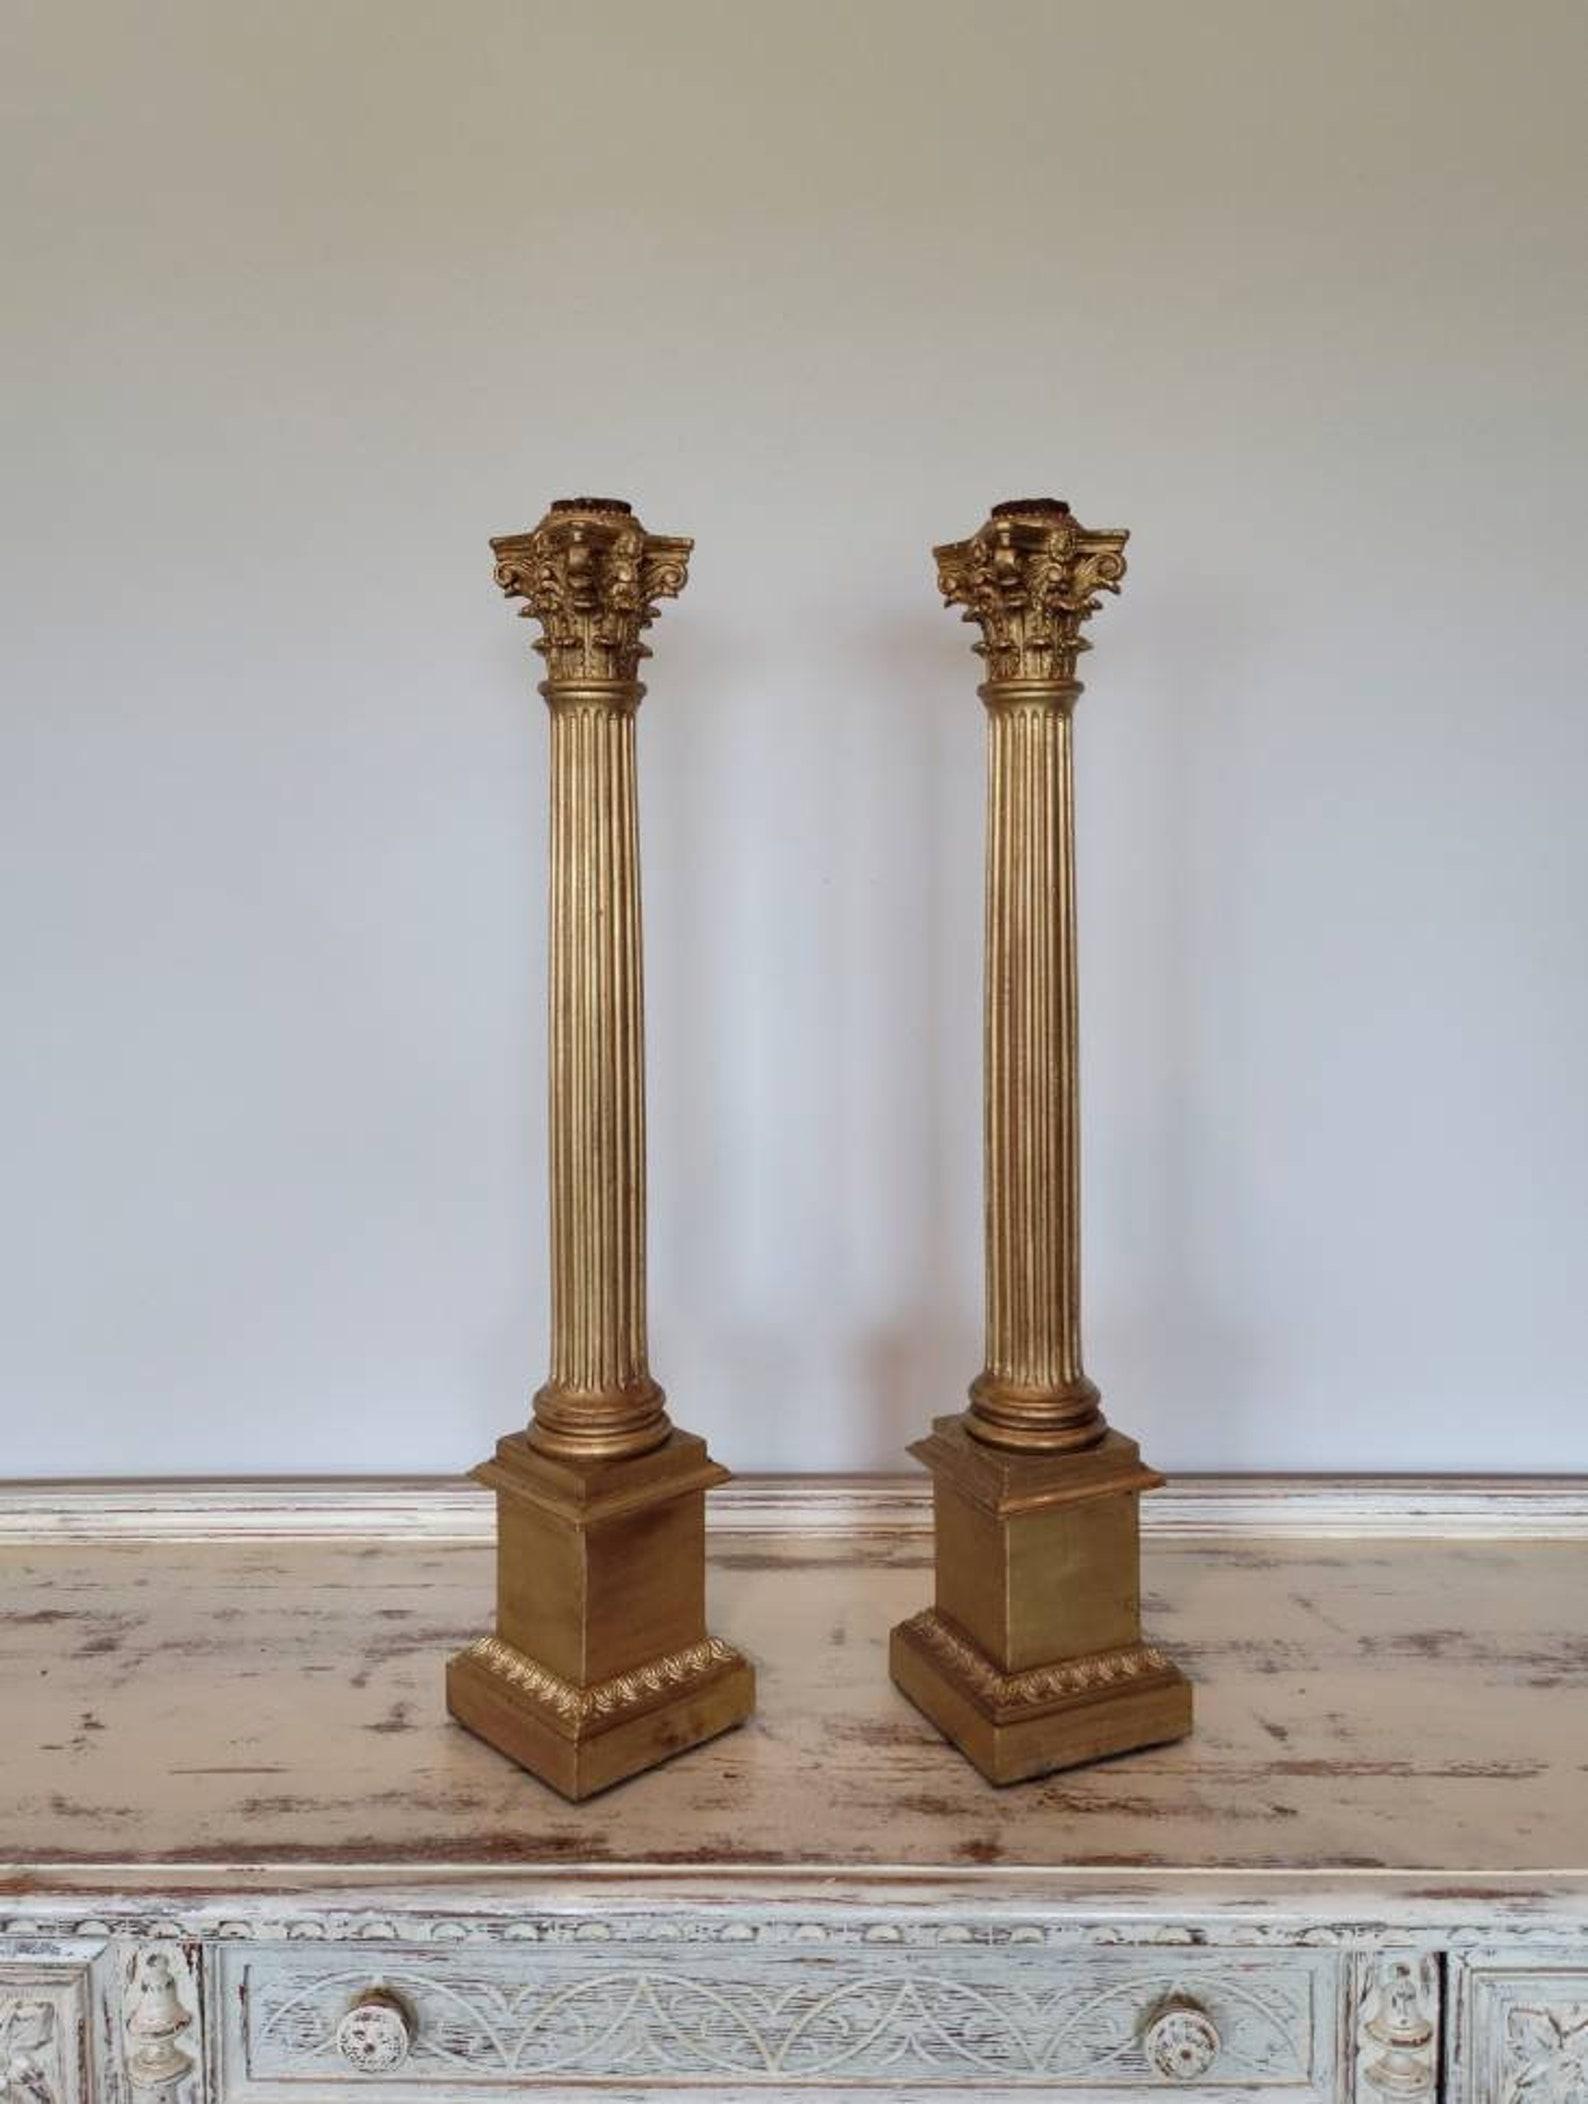 Antique Italian Neoclassical Giltwood Corinthian Column Candle Stand Pair In Good Condition For Sale In Forney, TX